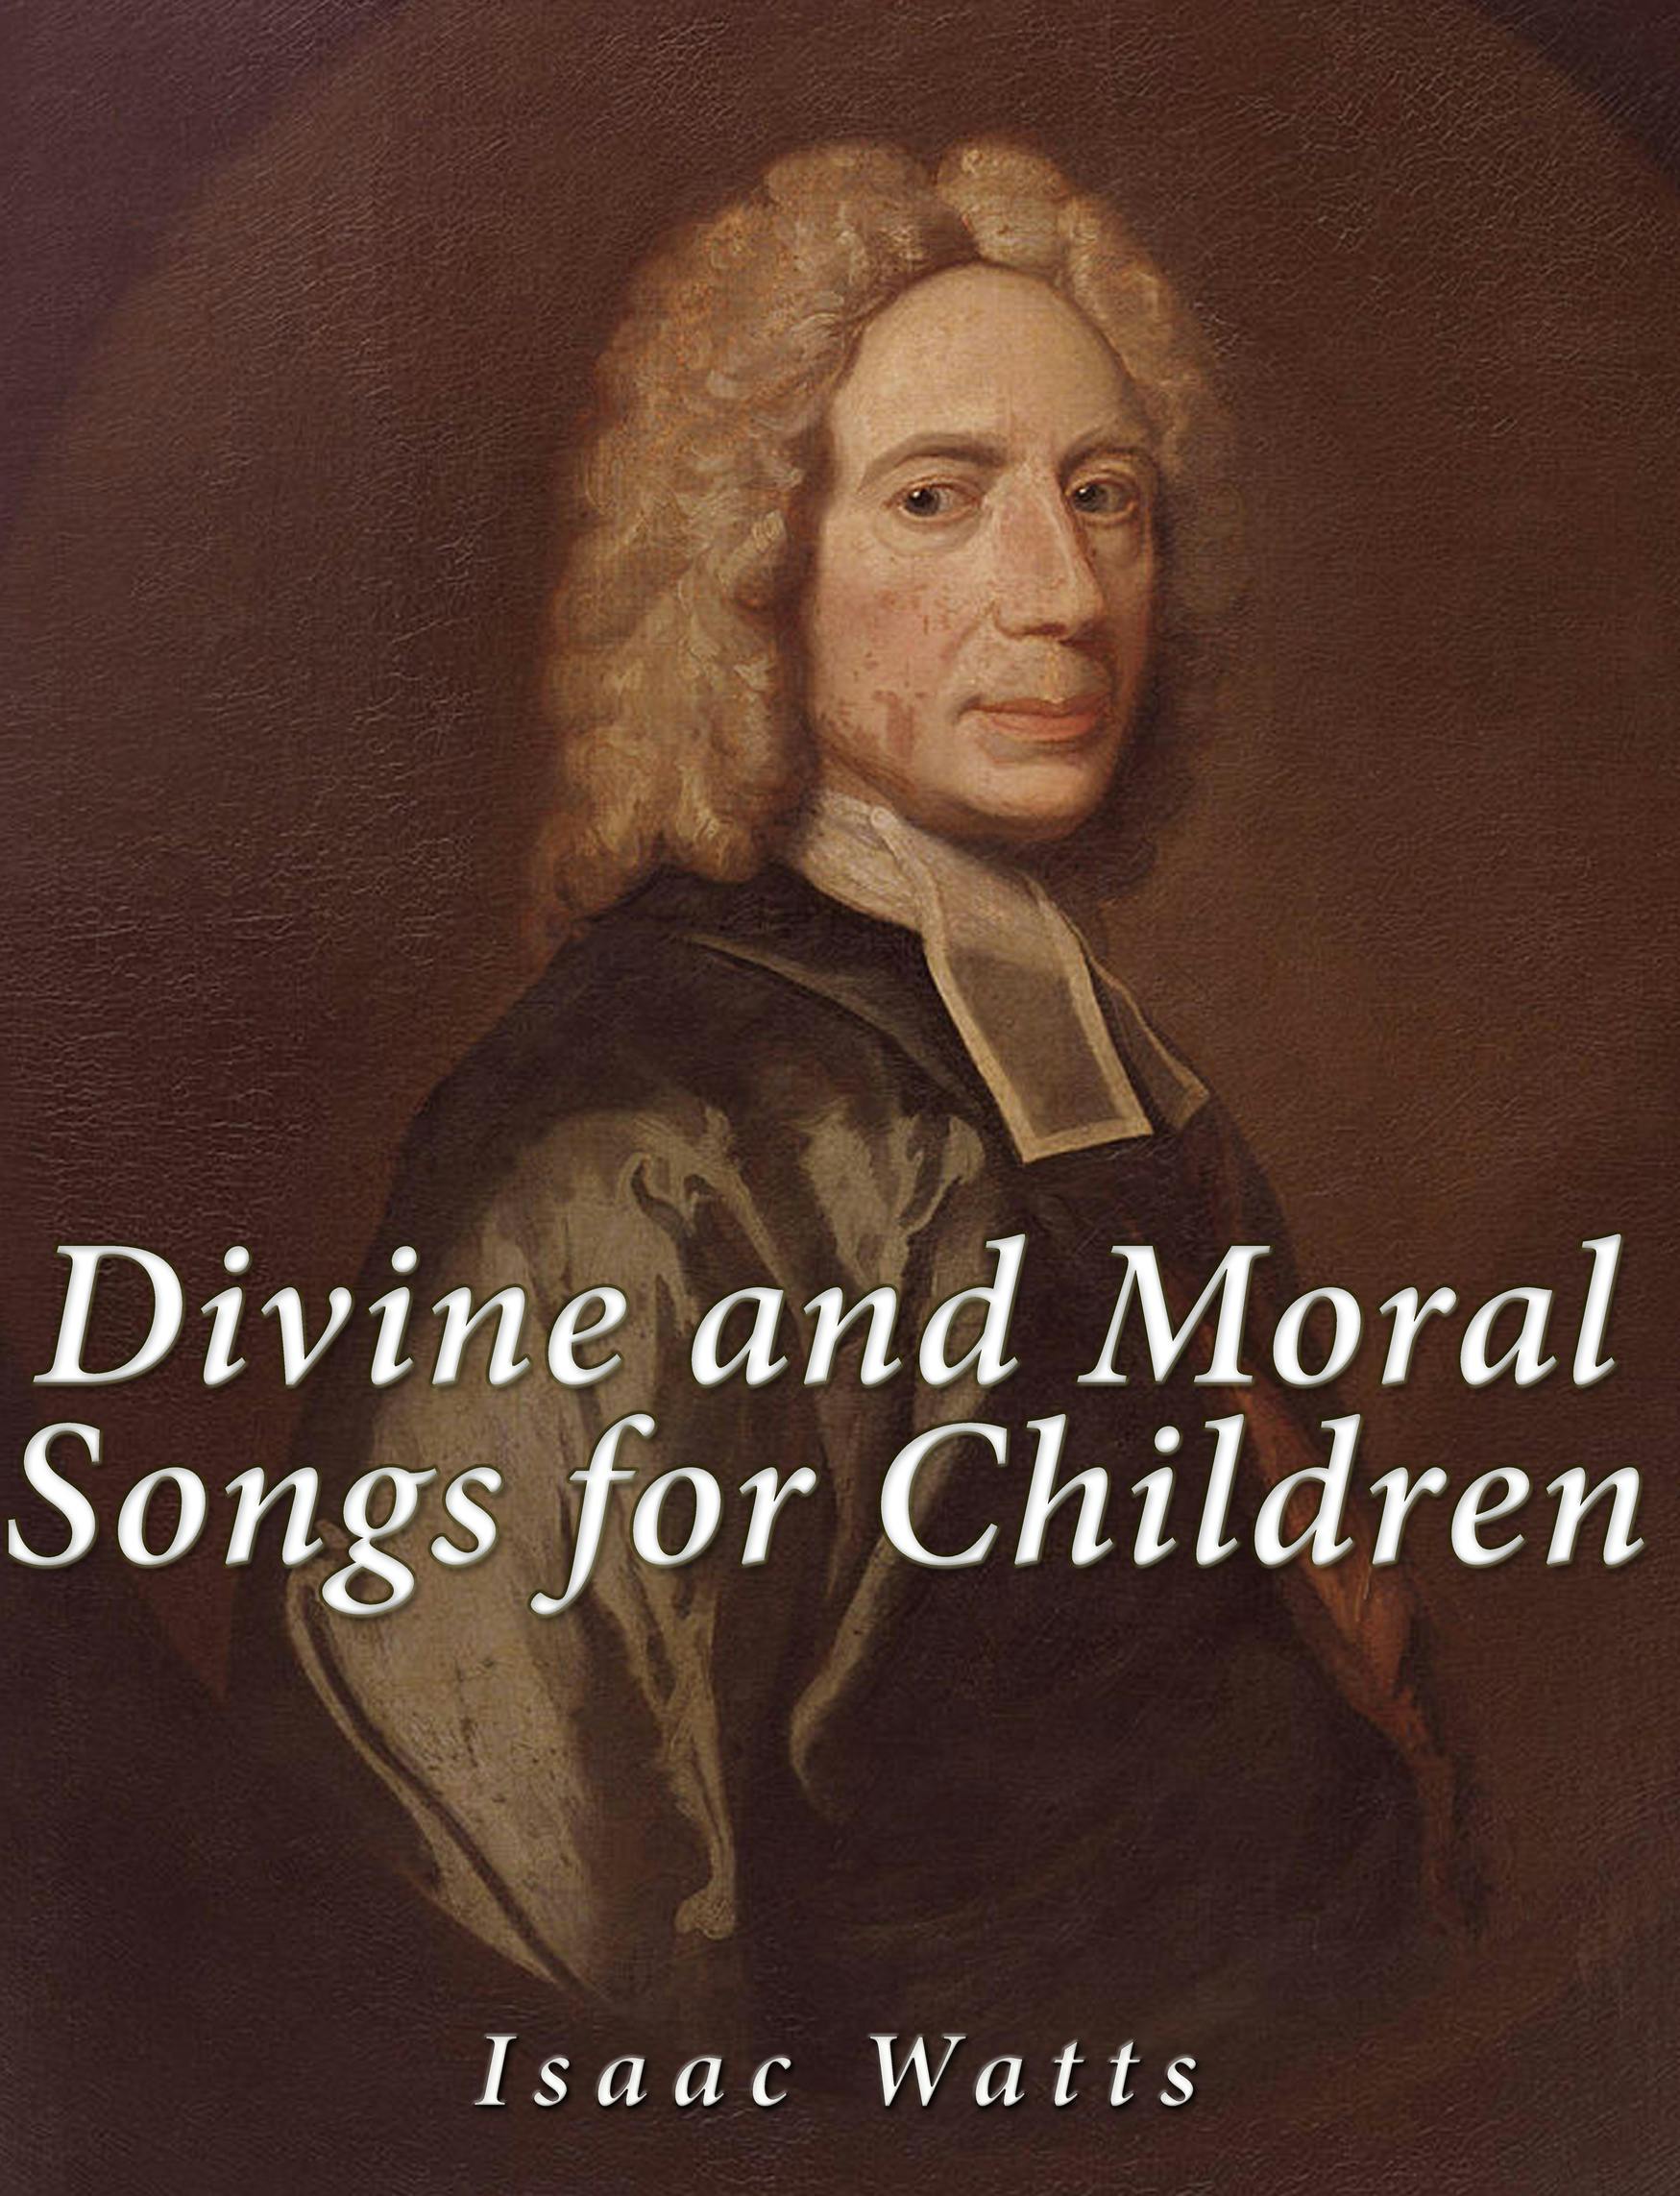 Divine and Moral Songs for Children - undefined